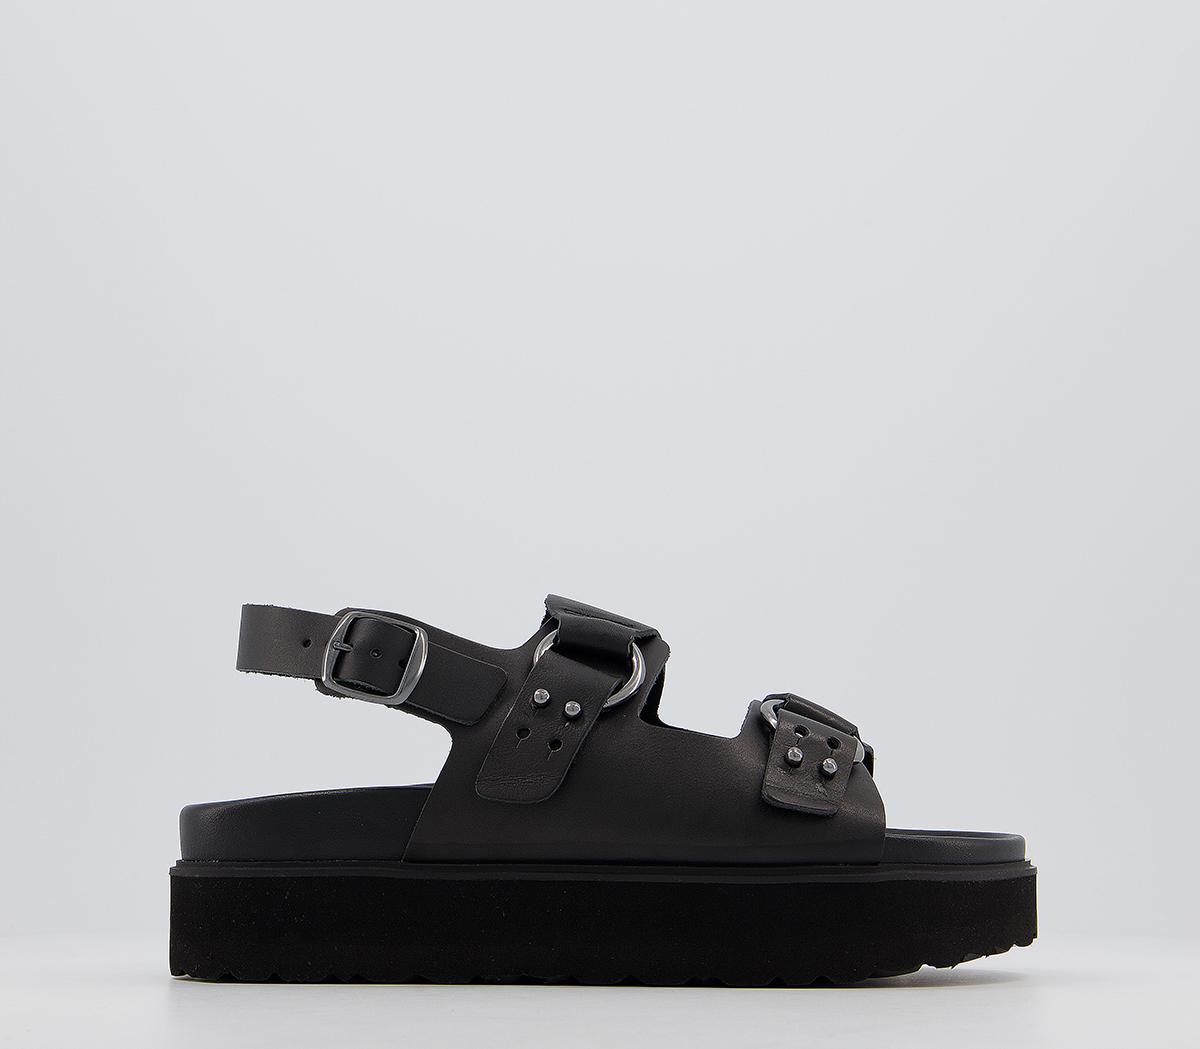 OFFICEMicha Ring Reef Footbed SandalsBlack Leather